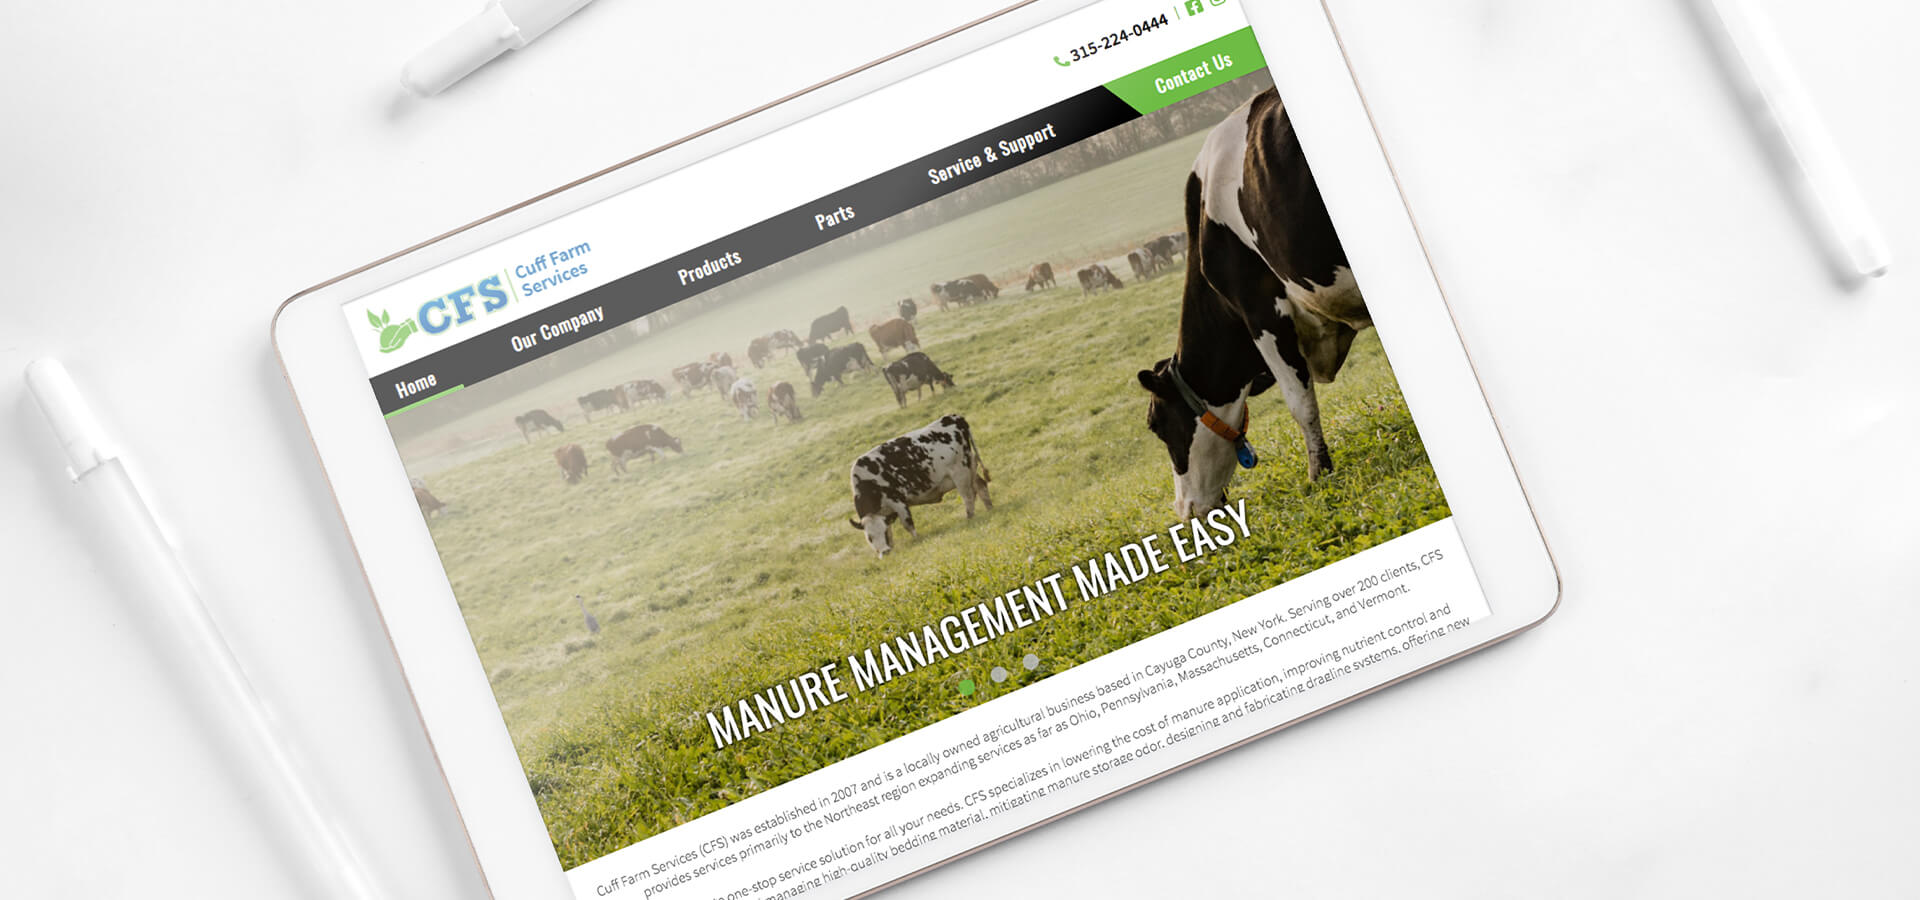 Cuff Farm Services website on a tablet